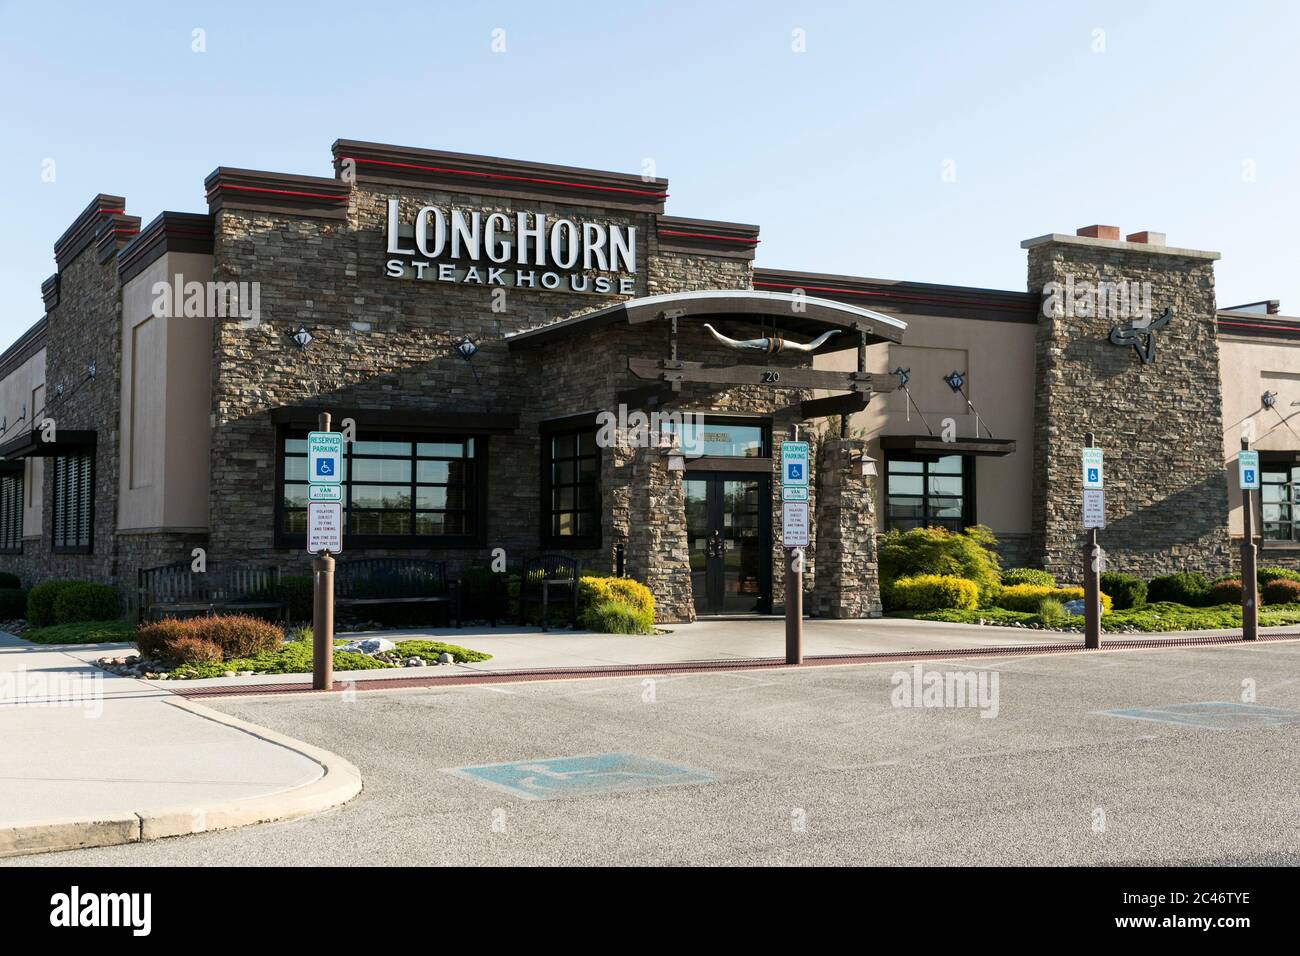 A logo sign outside of a LongHorn Steakhouse restaurant location in Hanover, Pennsylvania on June 12, 2020. Stock Photo